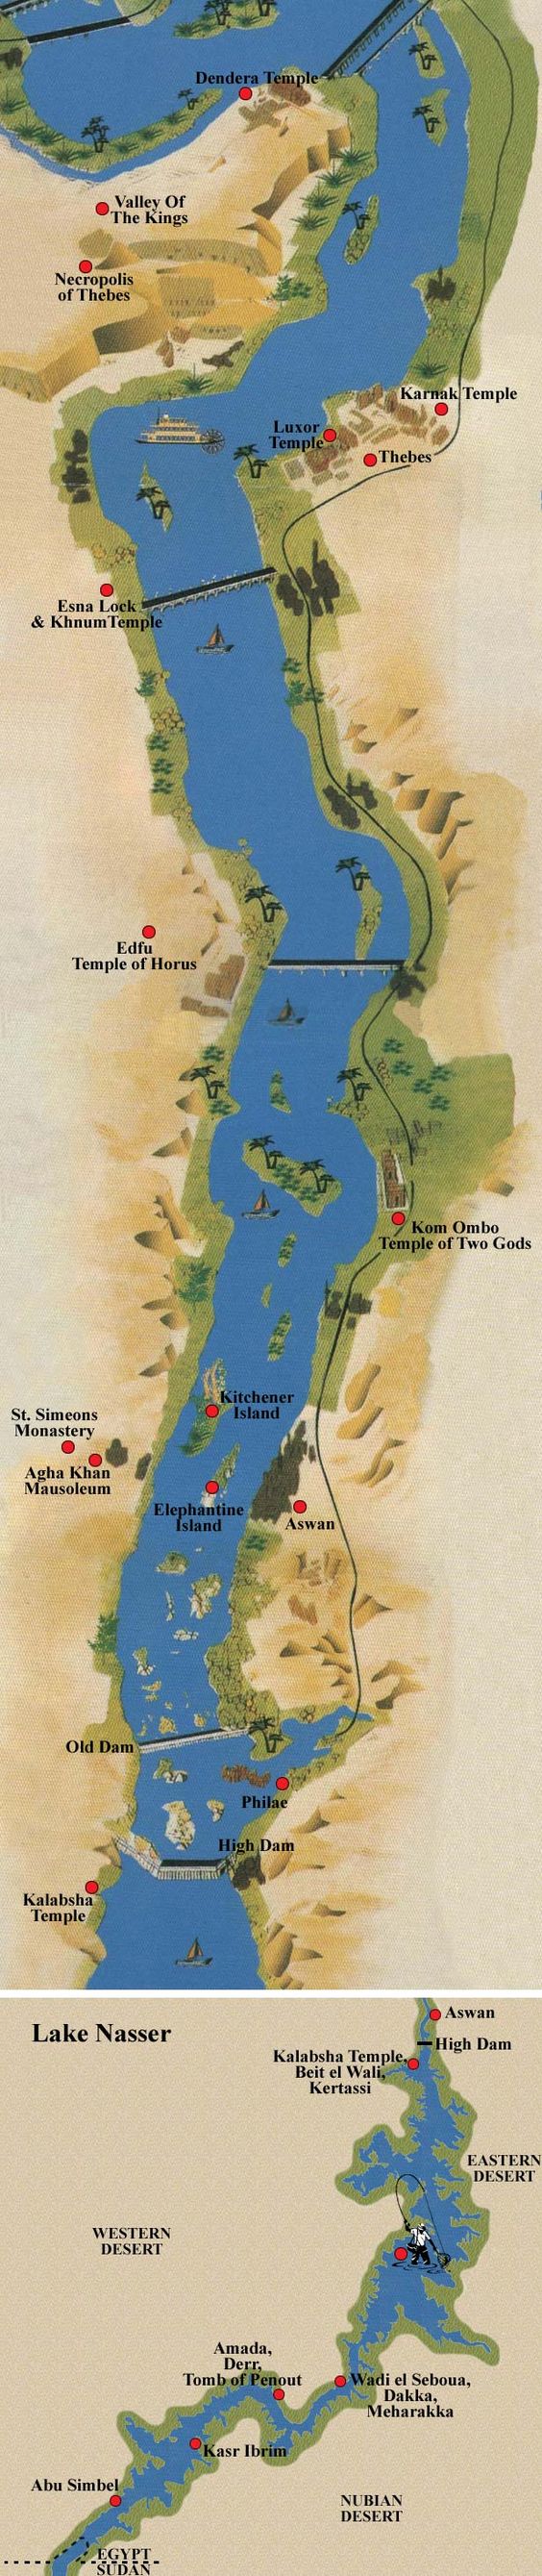 The Nile Map